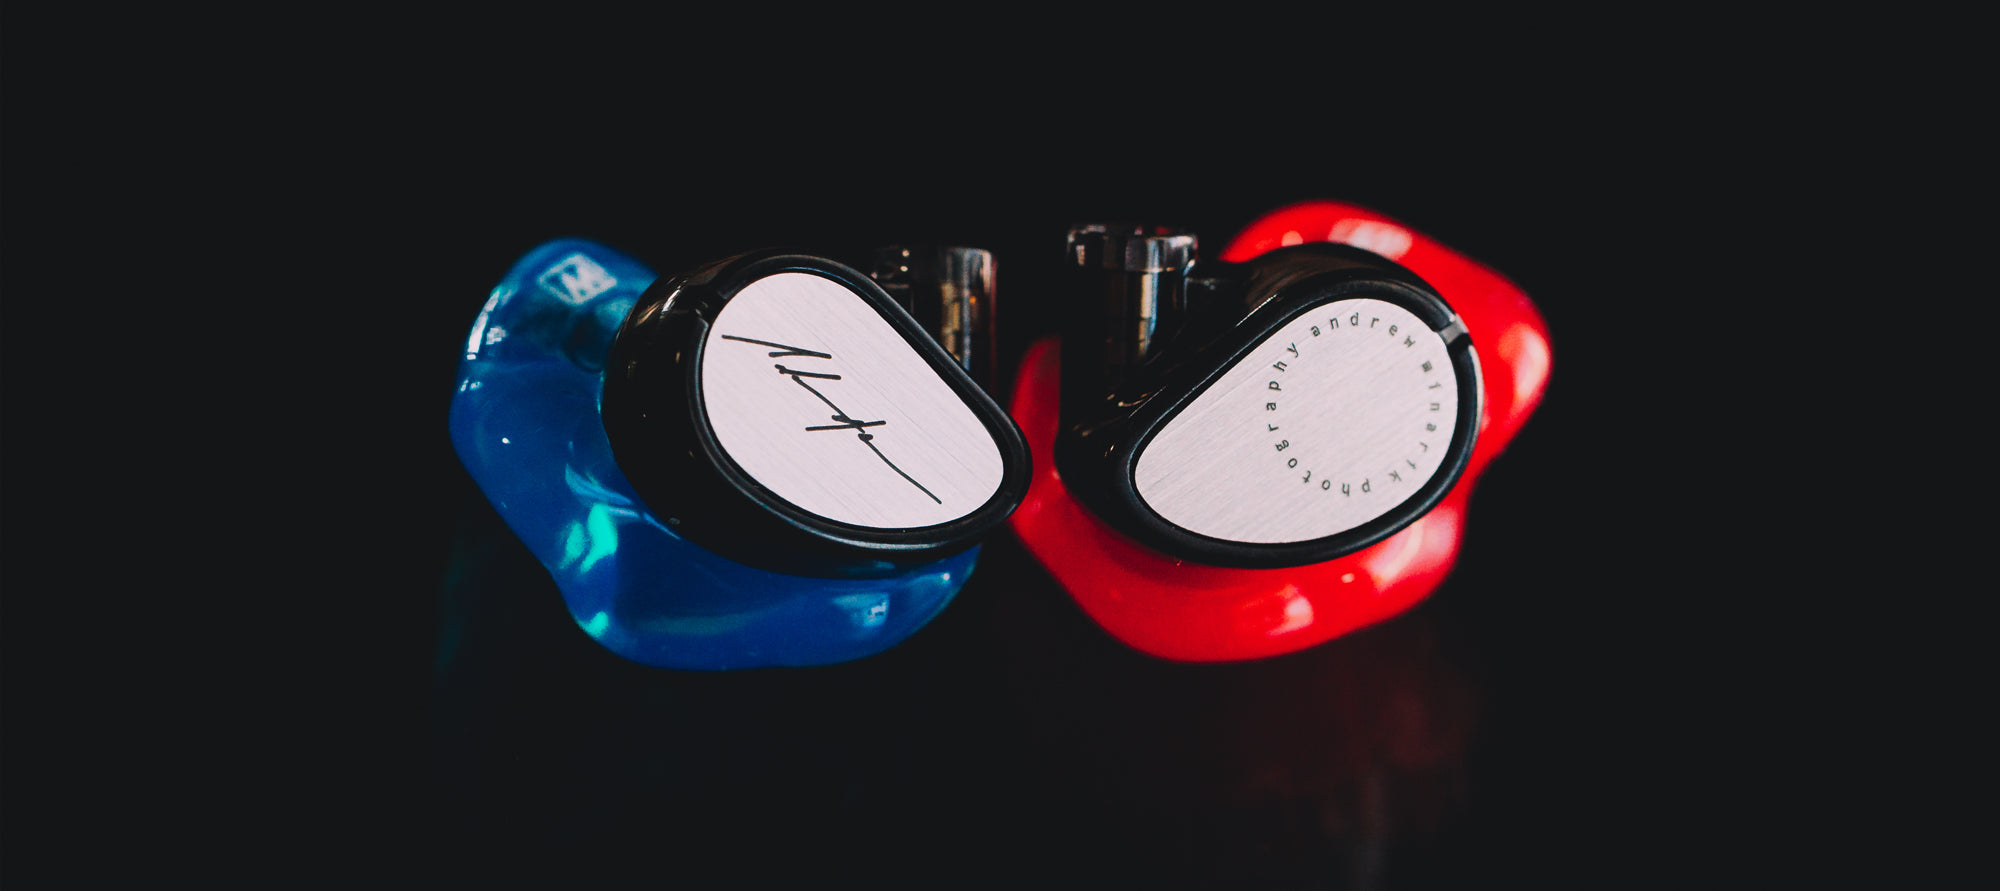 Two high-end in-ear monitors with custom ear molds, one blue and the other red, featuring metallic faceplates with stylish logos, displayed against a dark reflective background.